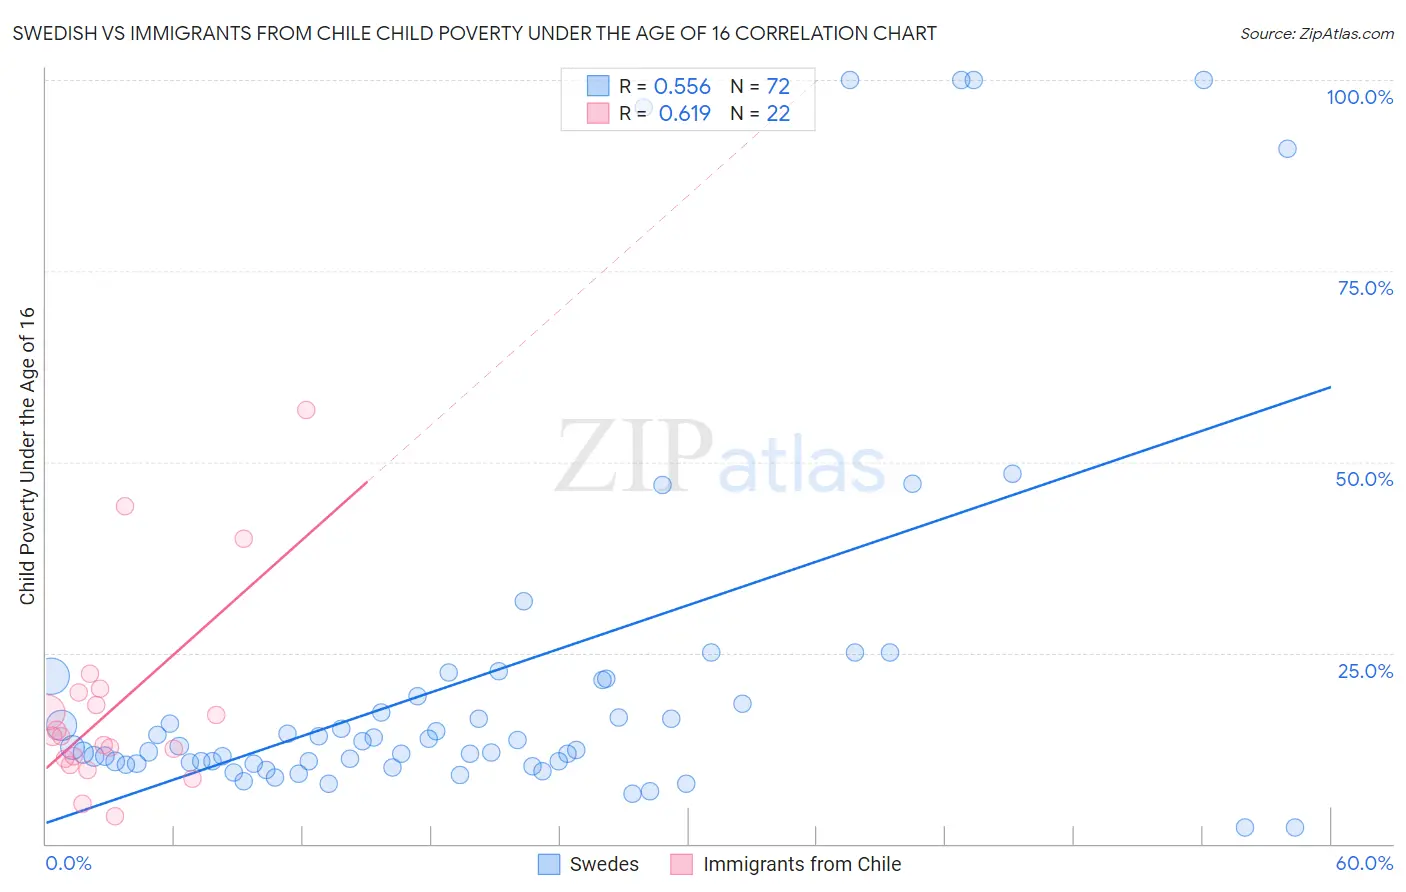 Swedish vs Immigrants from Chile Child Poverty Under the Age of 16